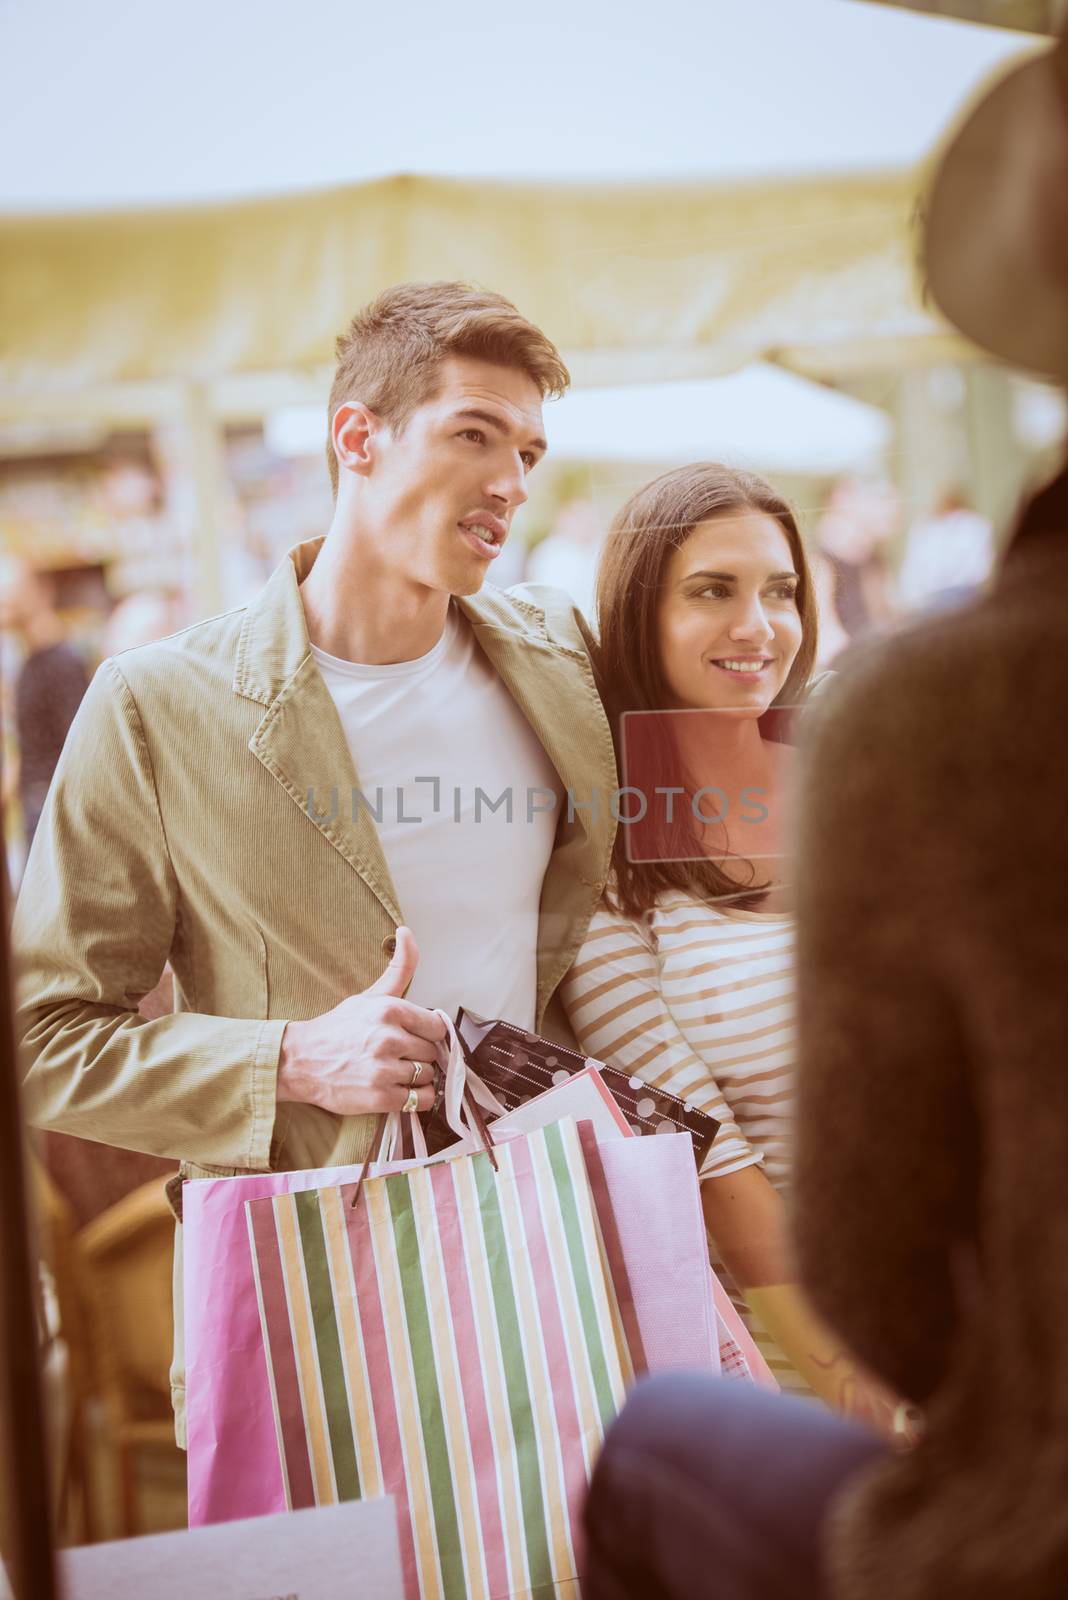 Young happy couple in shopping passes in front of window shopping mall carrying bags in their hands, looking in shop window.